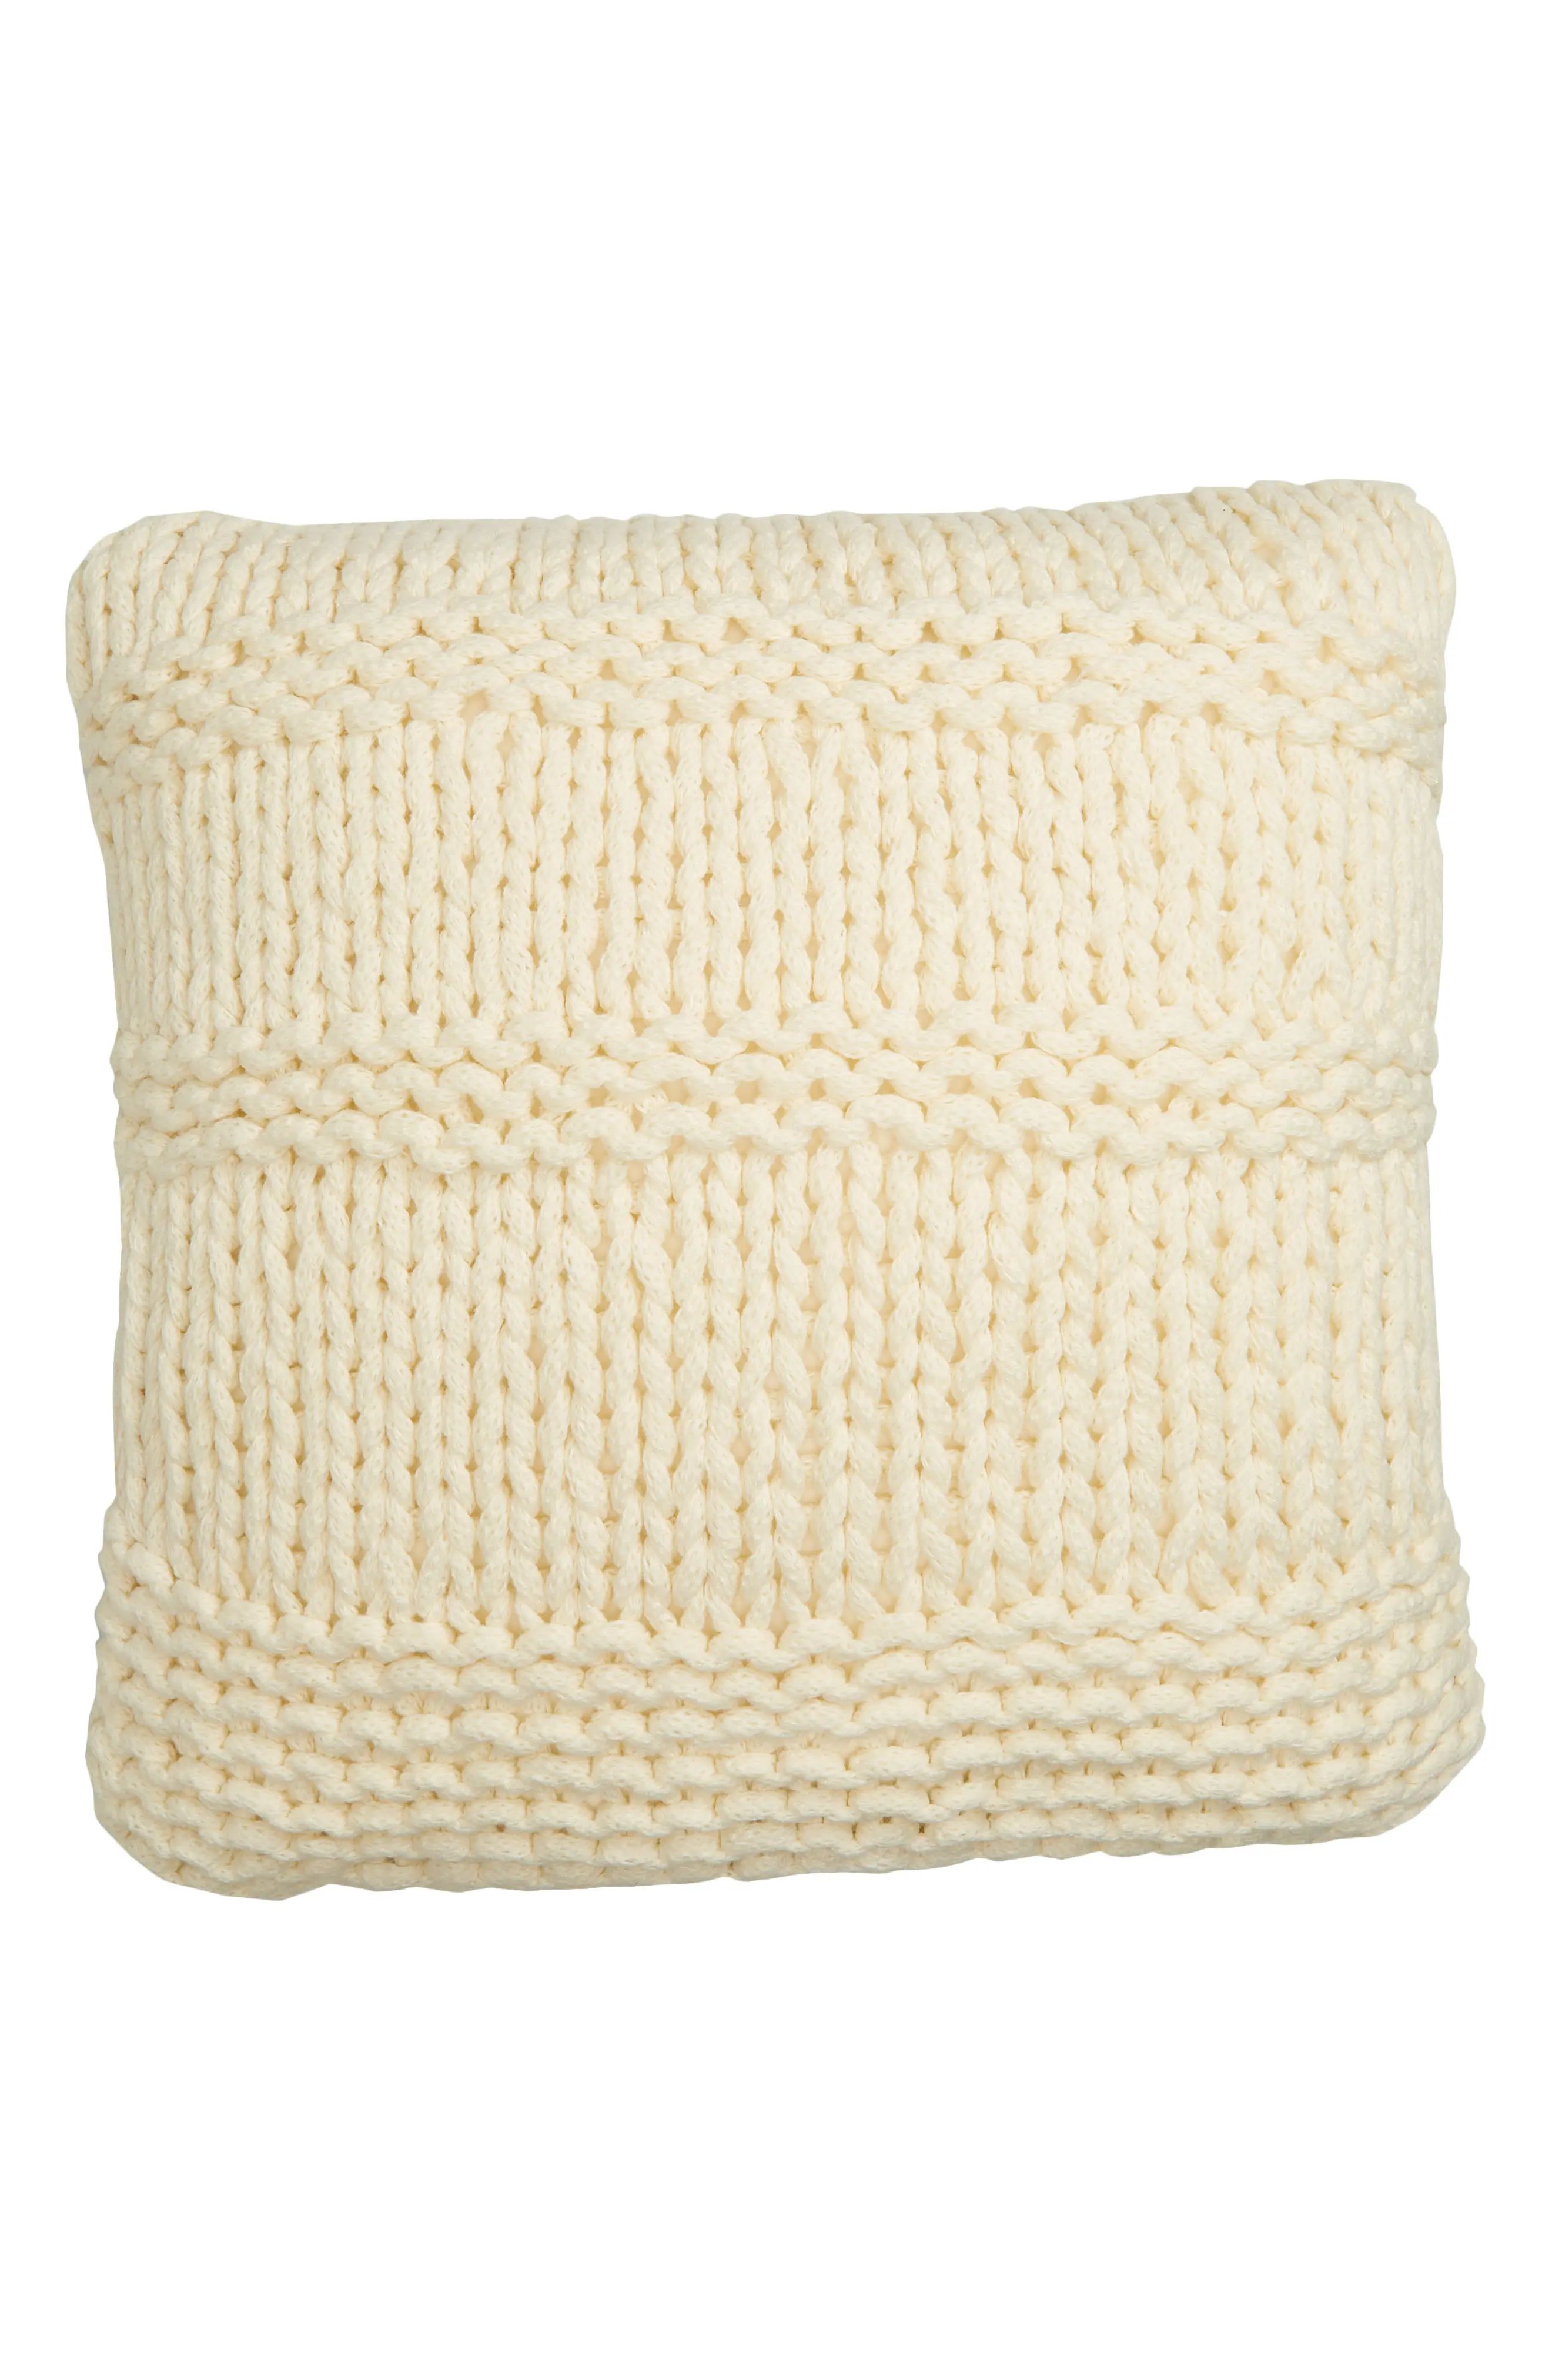 Nordstrom Mixed Stitch Knit Rope Accent Pillow in Ivory at Nordstrom | Nordstrom